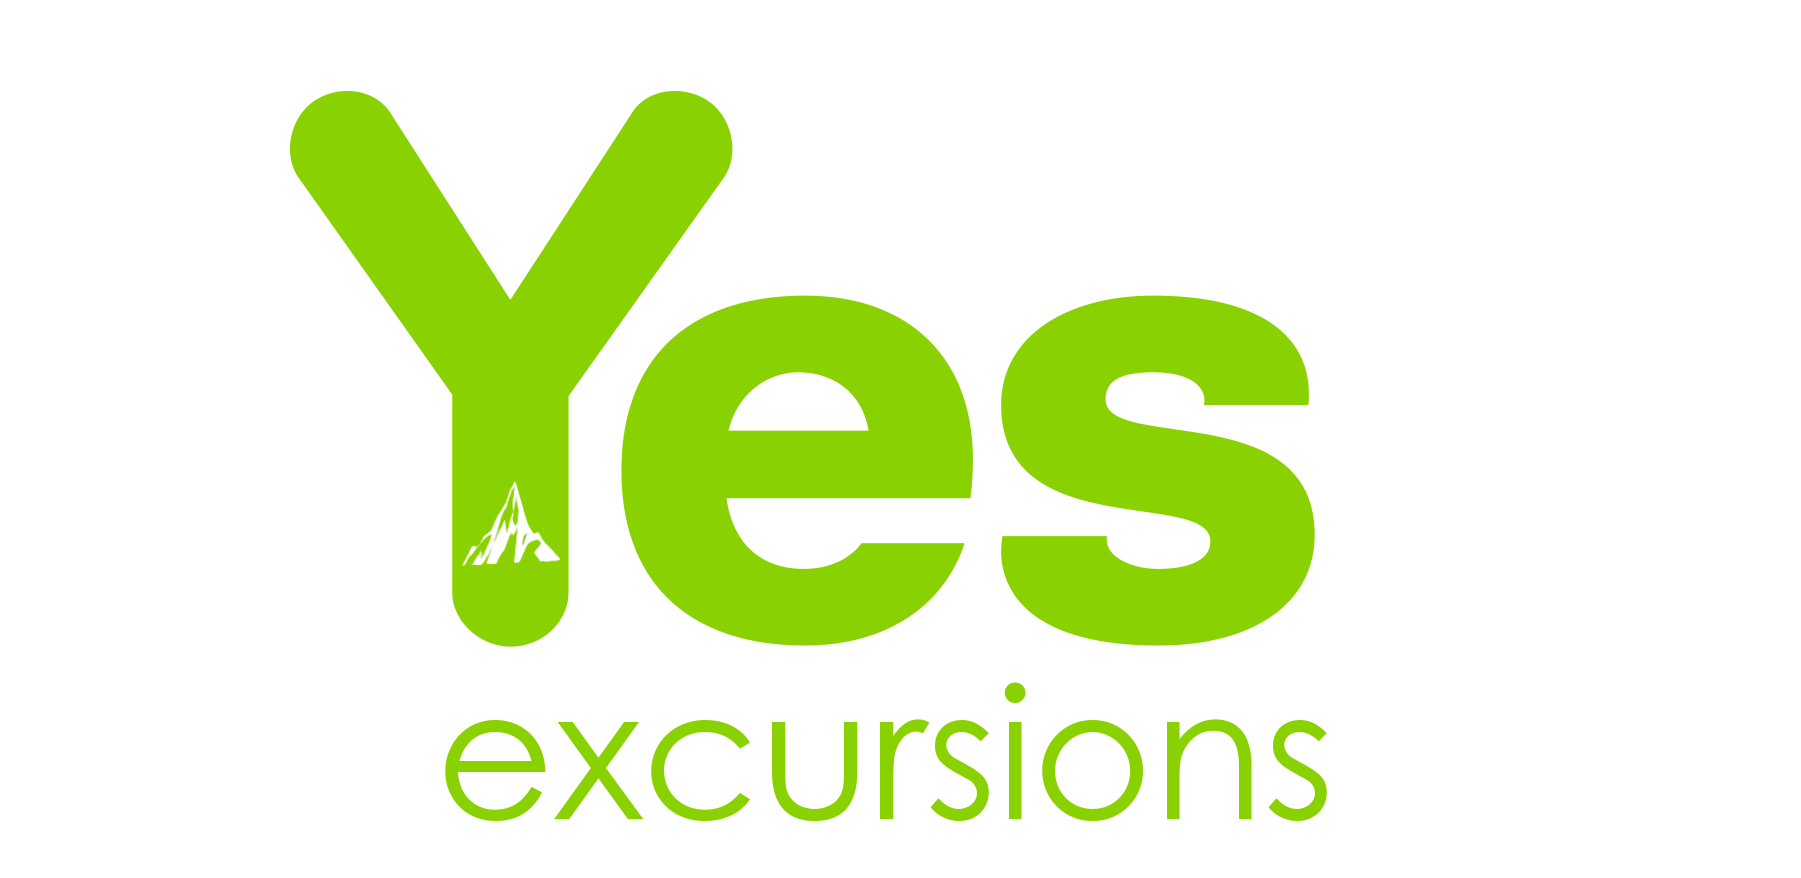 logo yes excursions